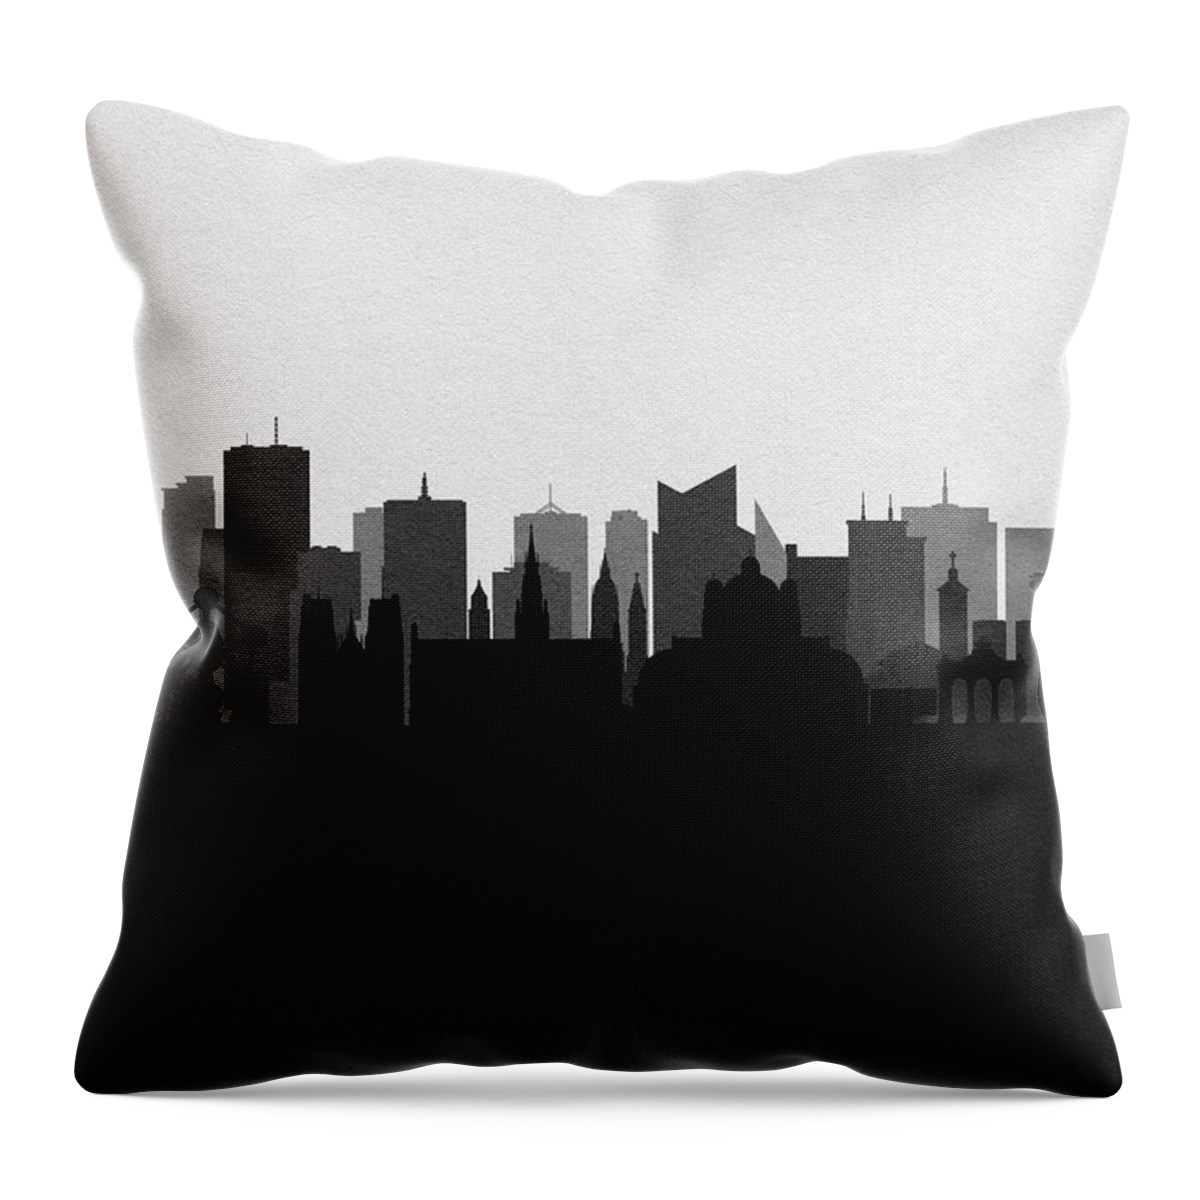 Brussels Throw Pillow featuring the digital art Brussels Cityscape Art by Inspirowl Design